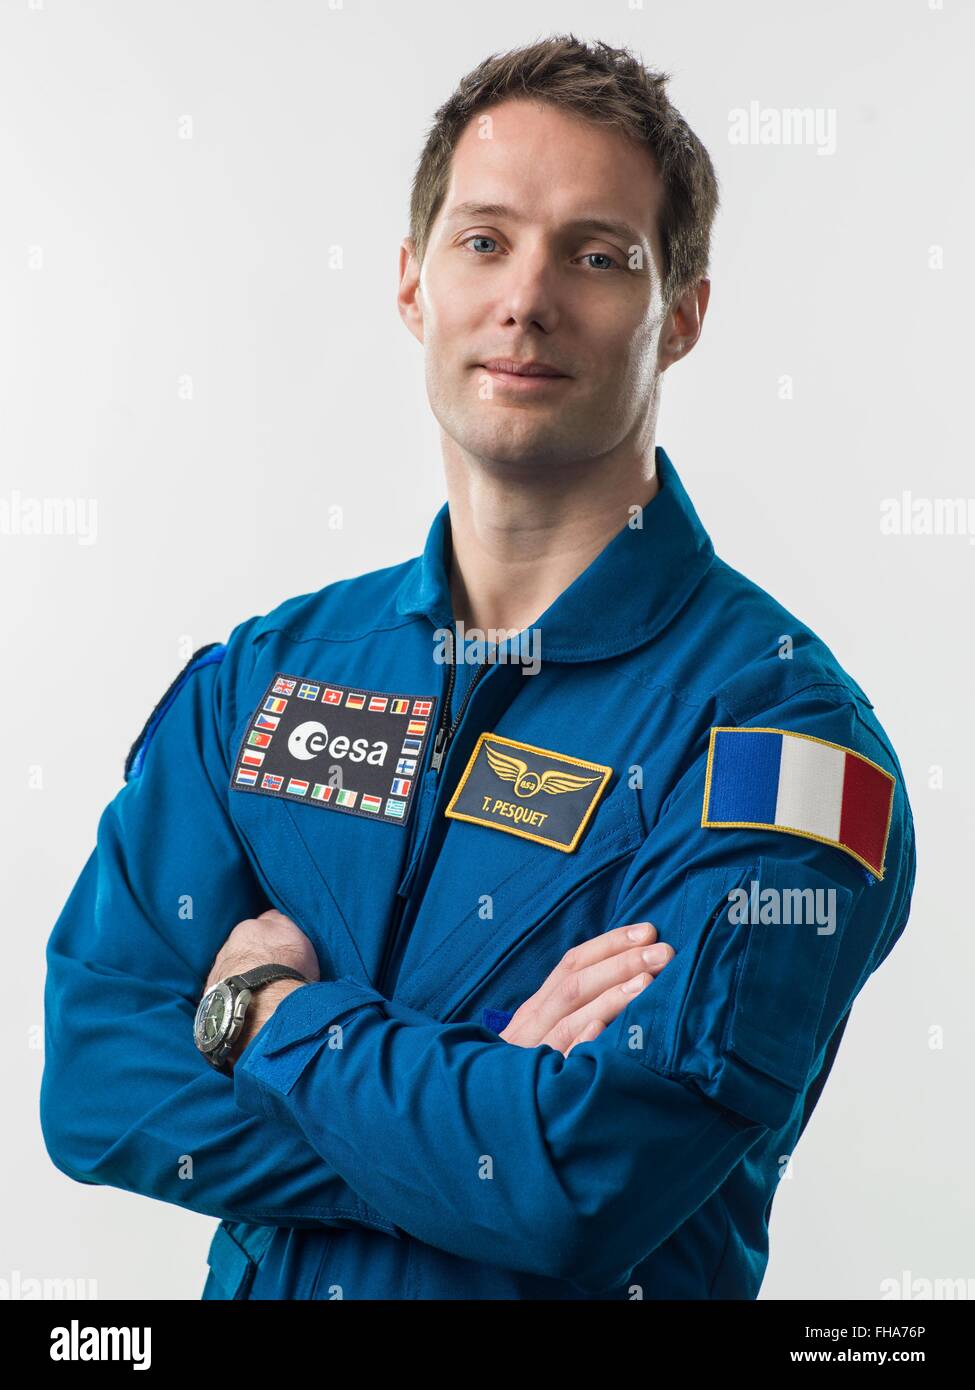 European Space Agency astronaut and Expedition 50/51 crew member Thomas Pesquet official portrait wearing the blue flight suit at the Johnson Space Center February 16, 2016 in Houston, Texas. Stock Photo